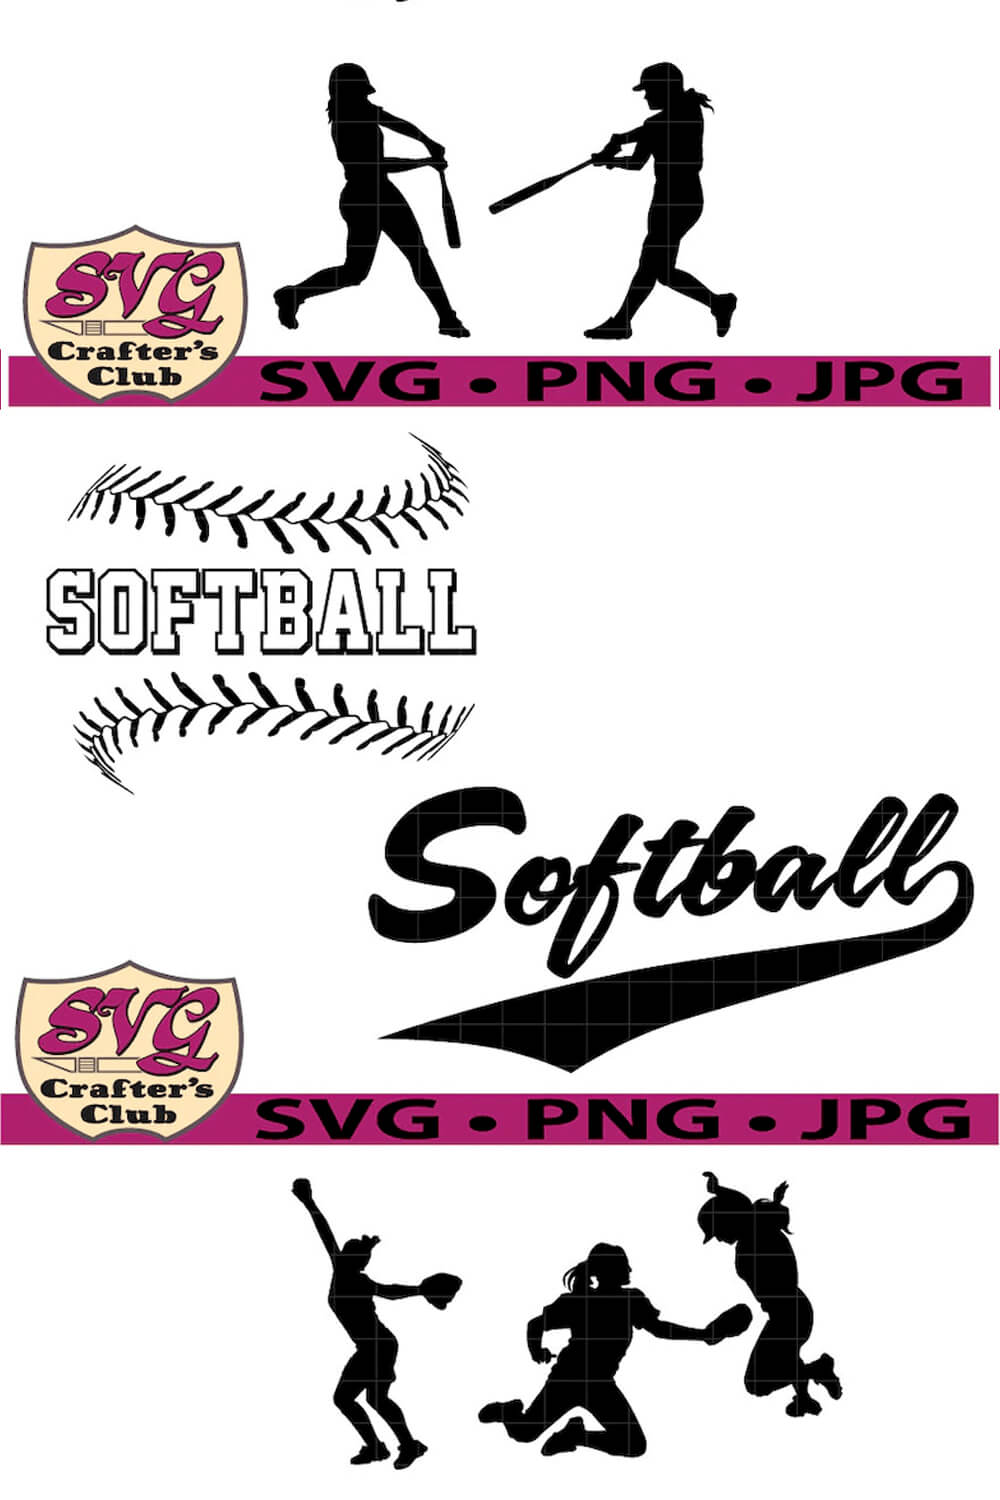 Design for cricuts and silhouettes and big title "Softball".